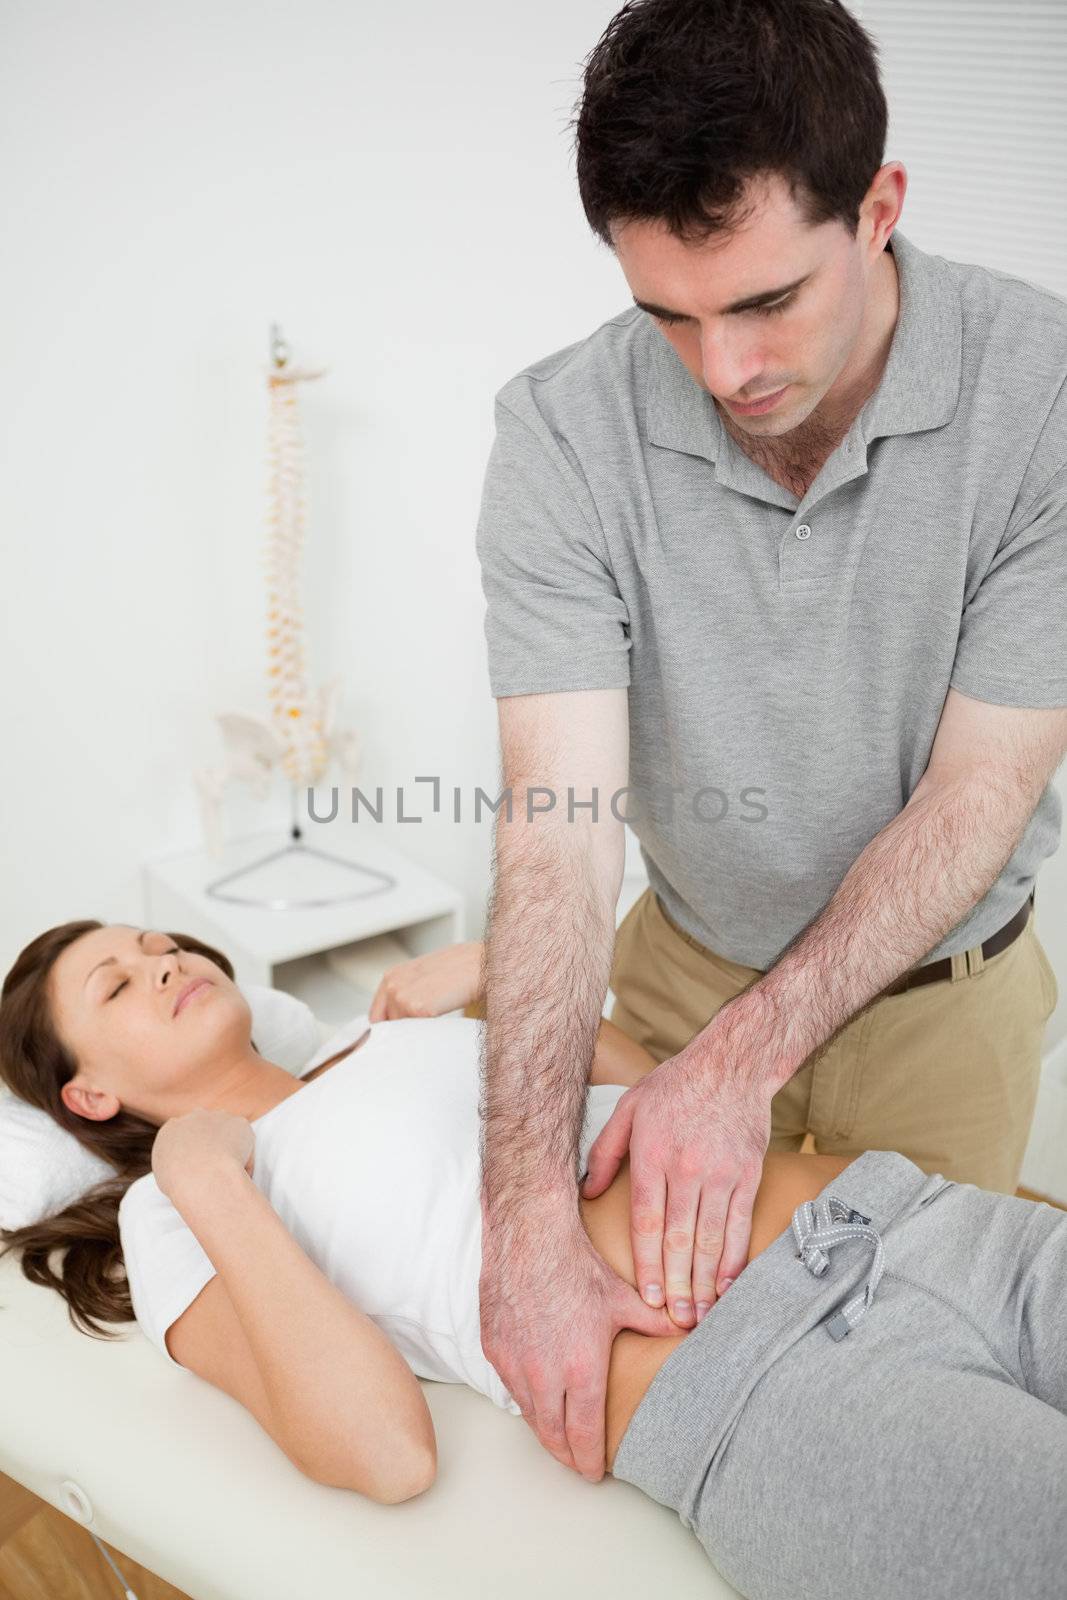 Brunette woman having a stomach ache while lying in a room